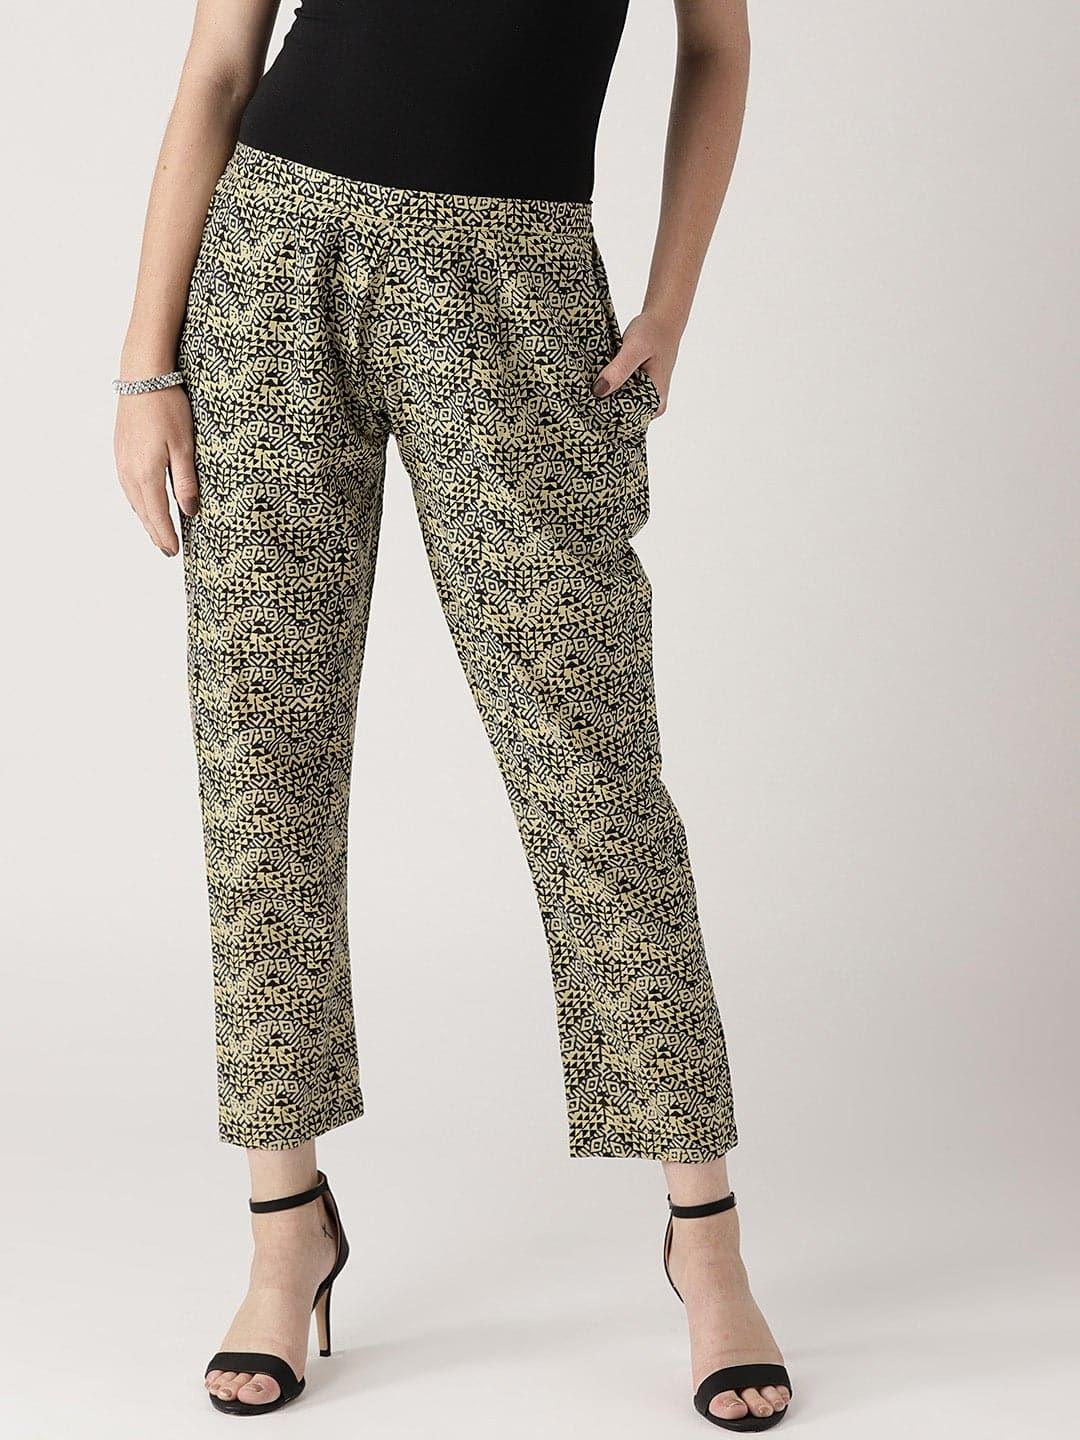 Beige Printed Cotton Trousers